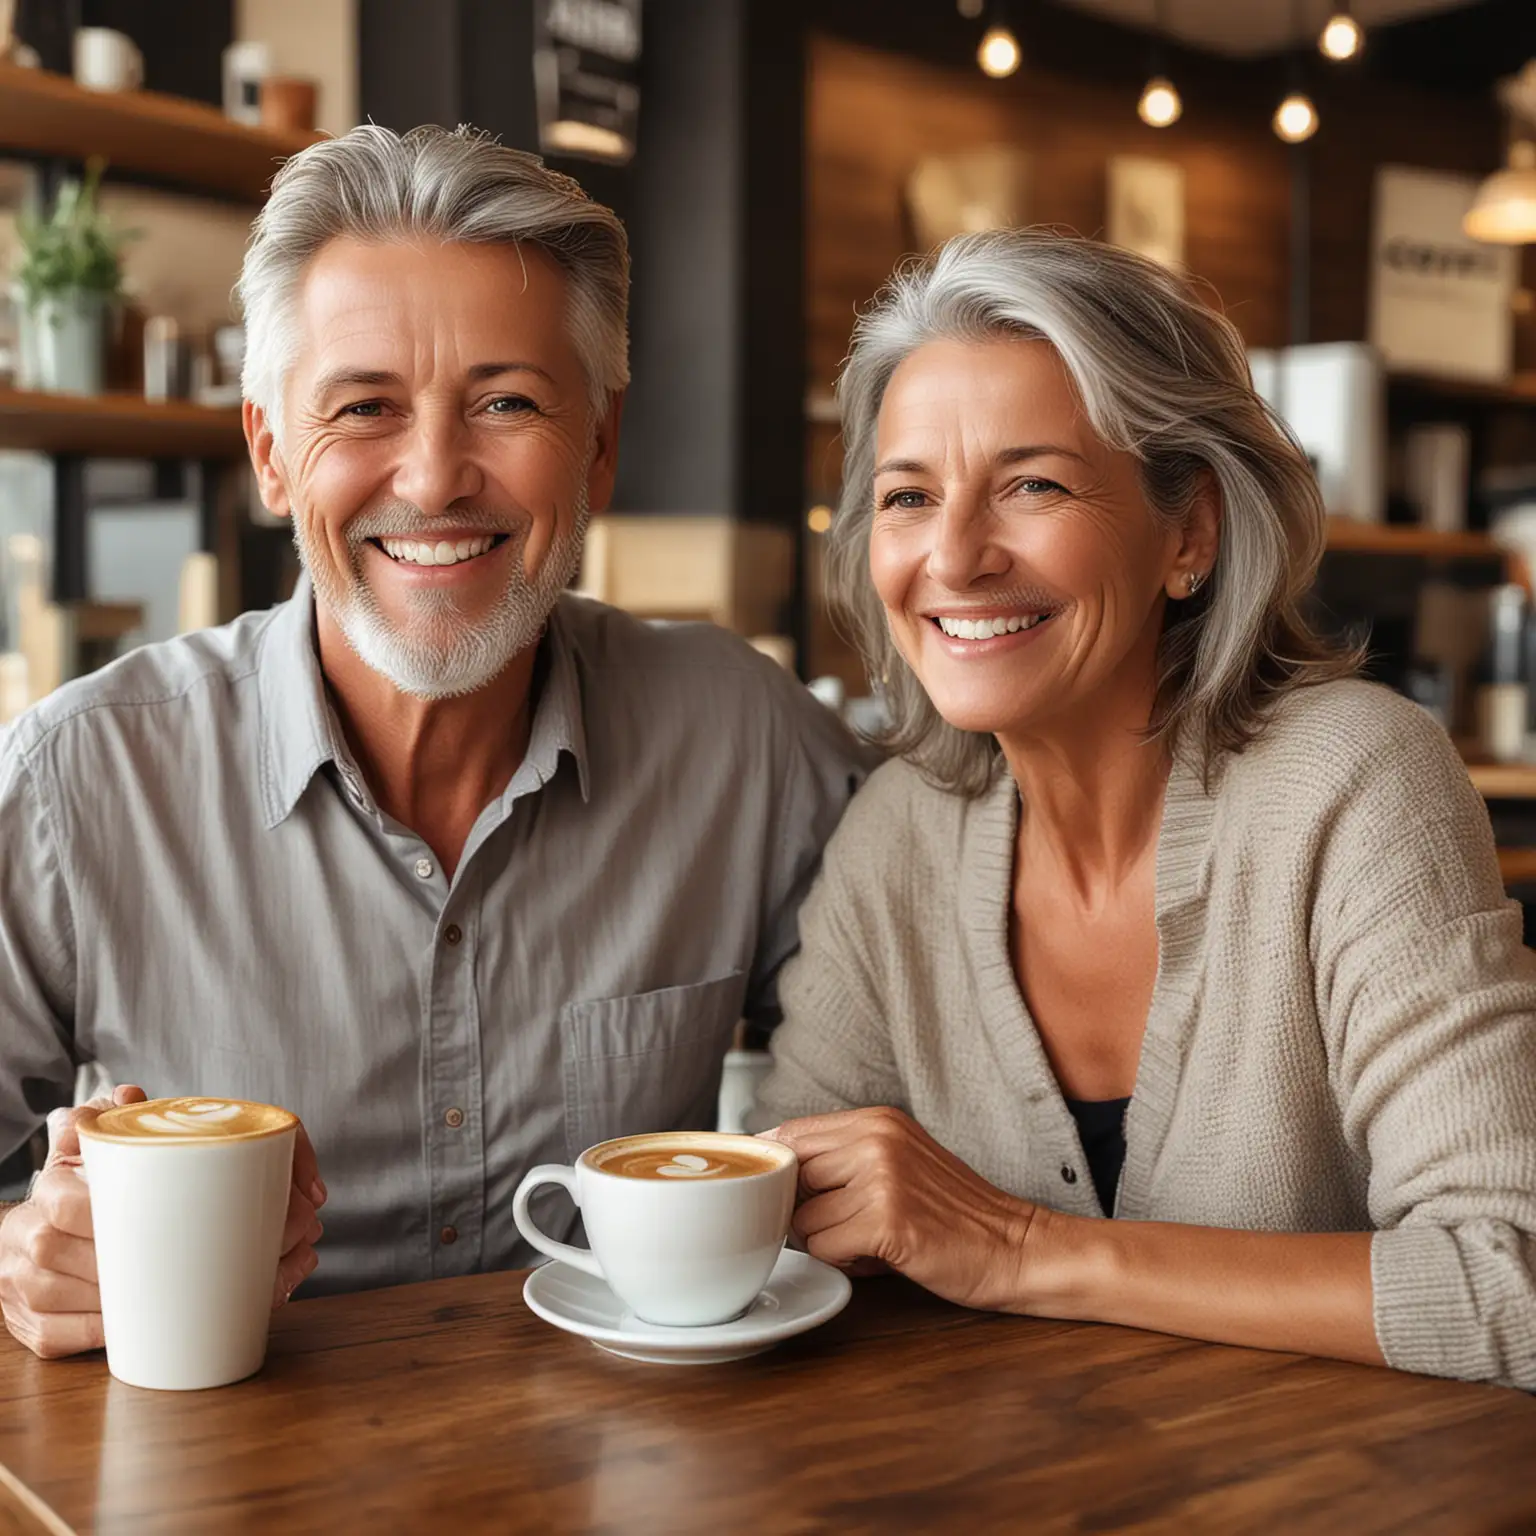 Show me an image of a happy mature couple having a coffee at a coffee place. 